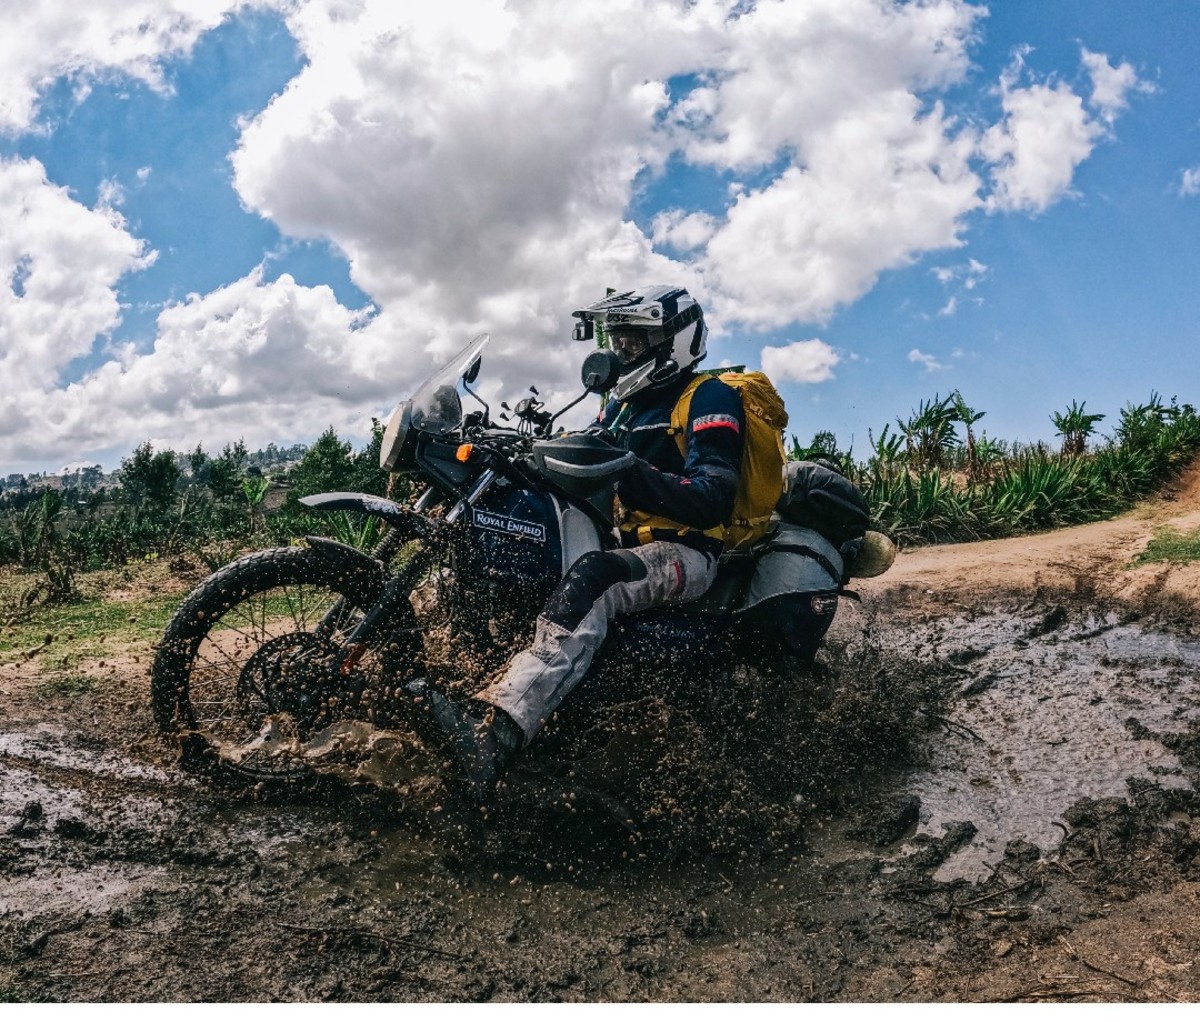 Motorcyclist throttles himself out of the mud on the Kili-Cape Town trail in Africa